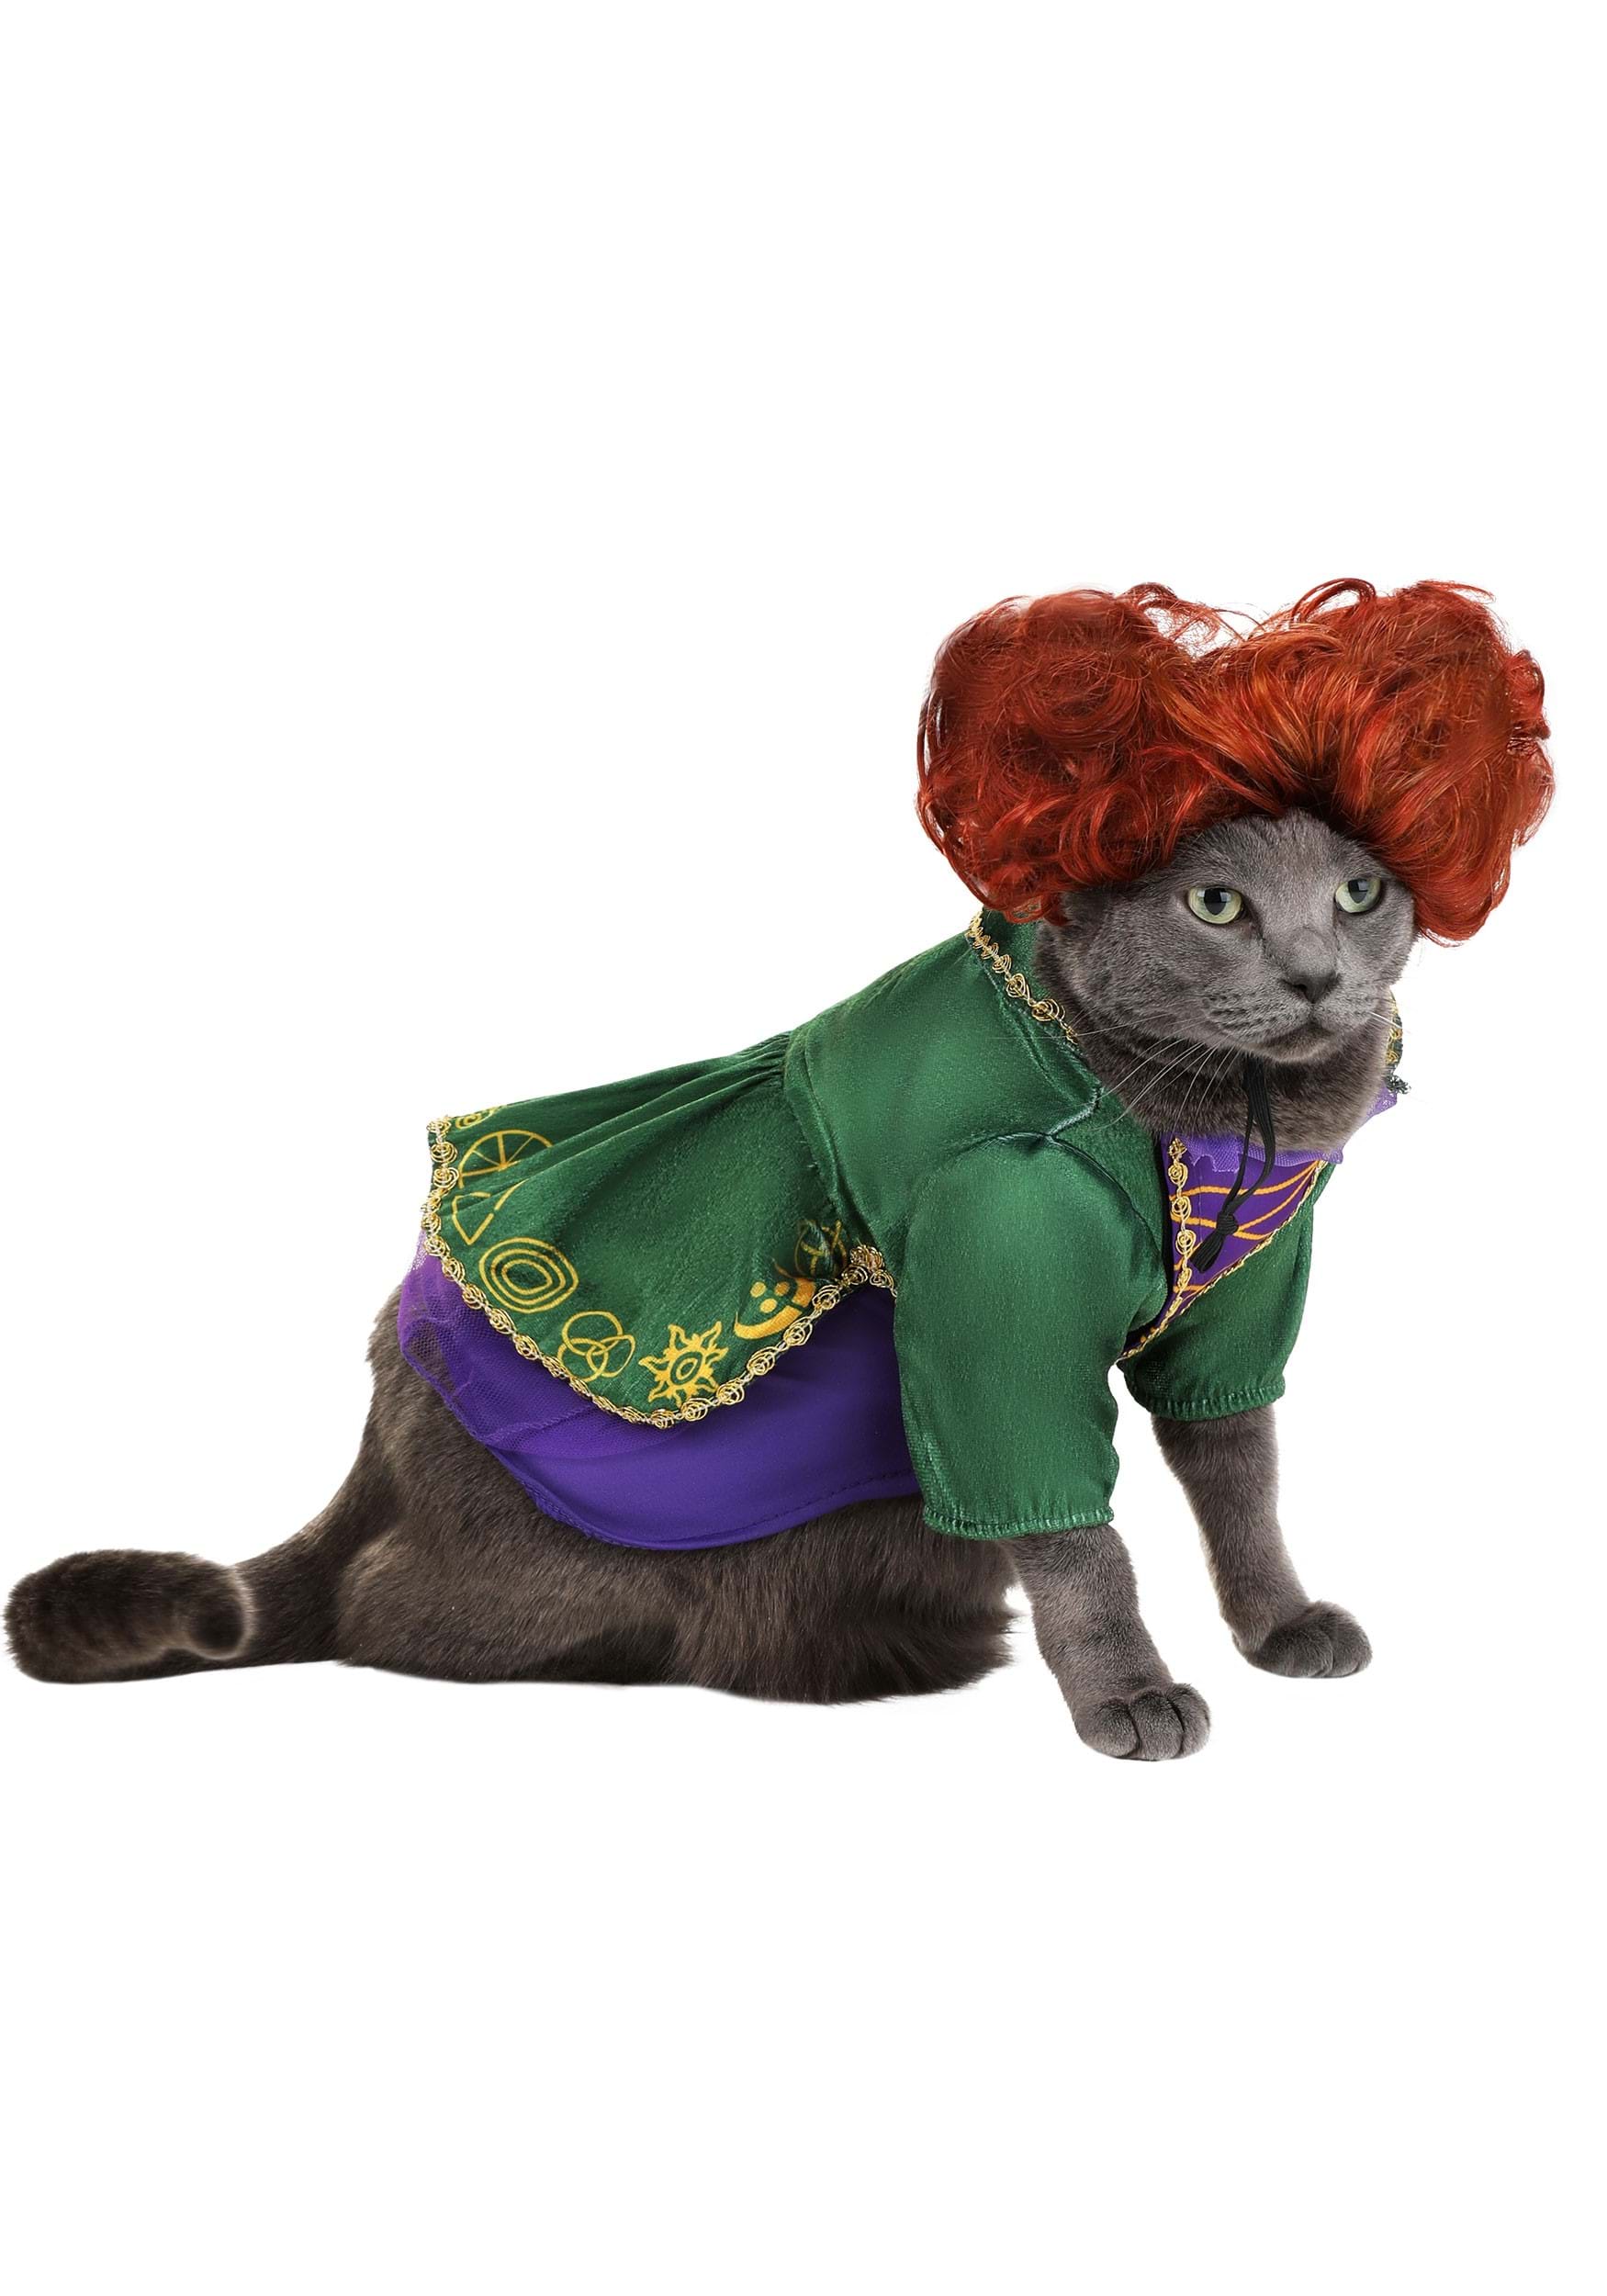 Cat and Dog 'Hocus Pocus' & Witch Costumes and Toys